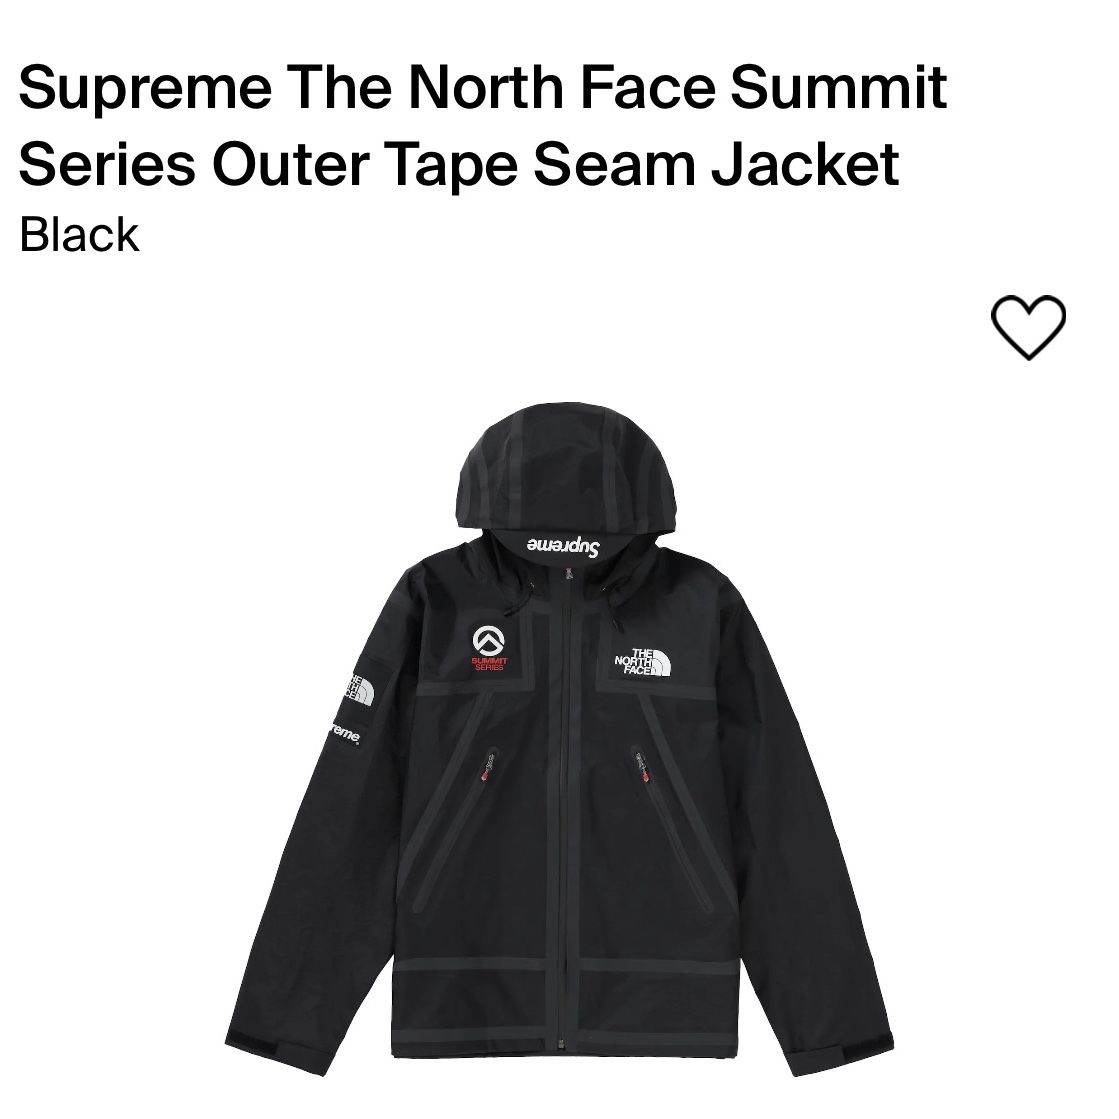 Supreme The North Face Summit Series Outer Tape Seam Jacket for